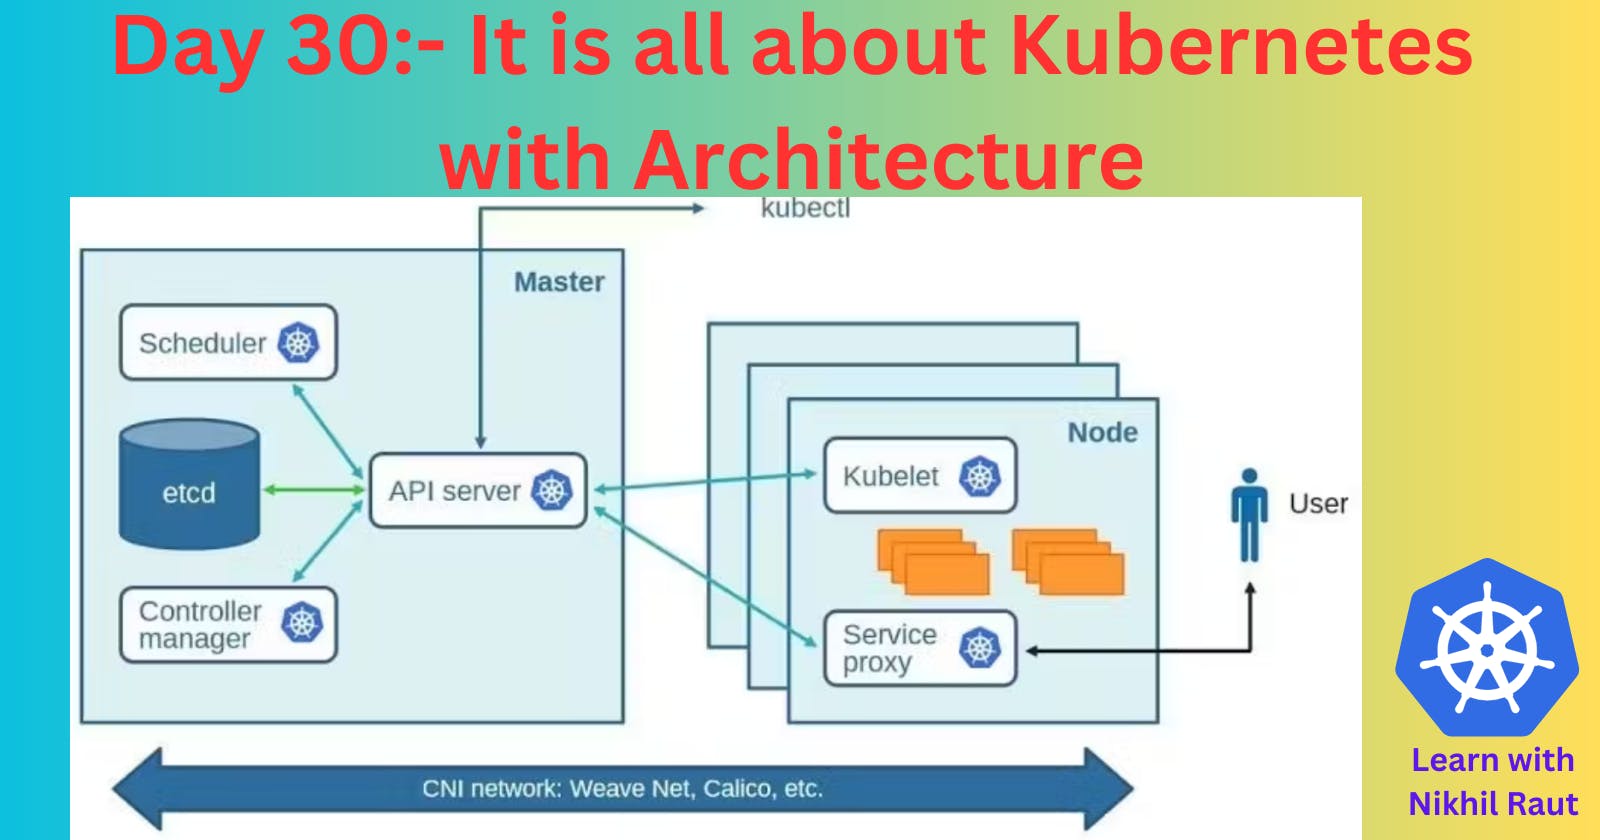 Day 30 Task: It is all about Kubernetes with Architecture